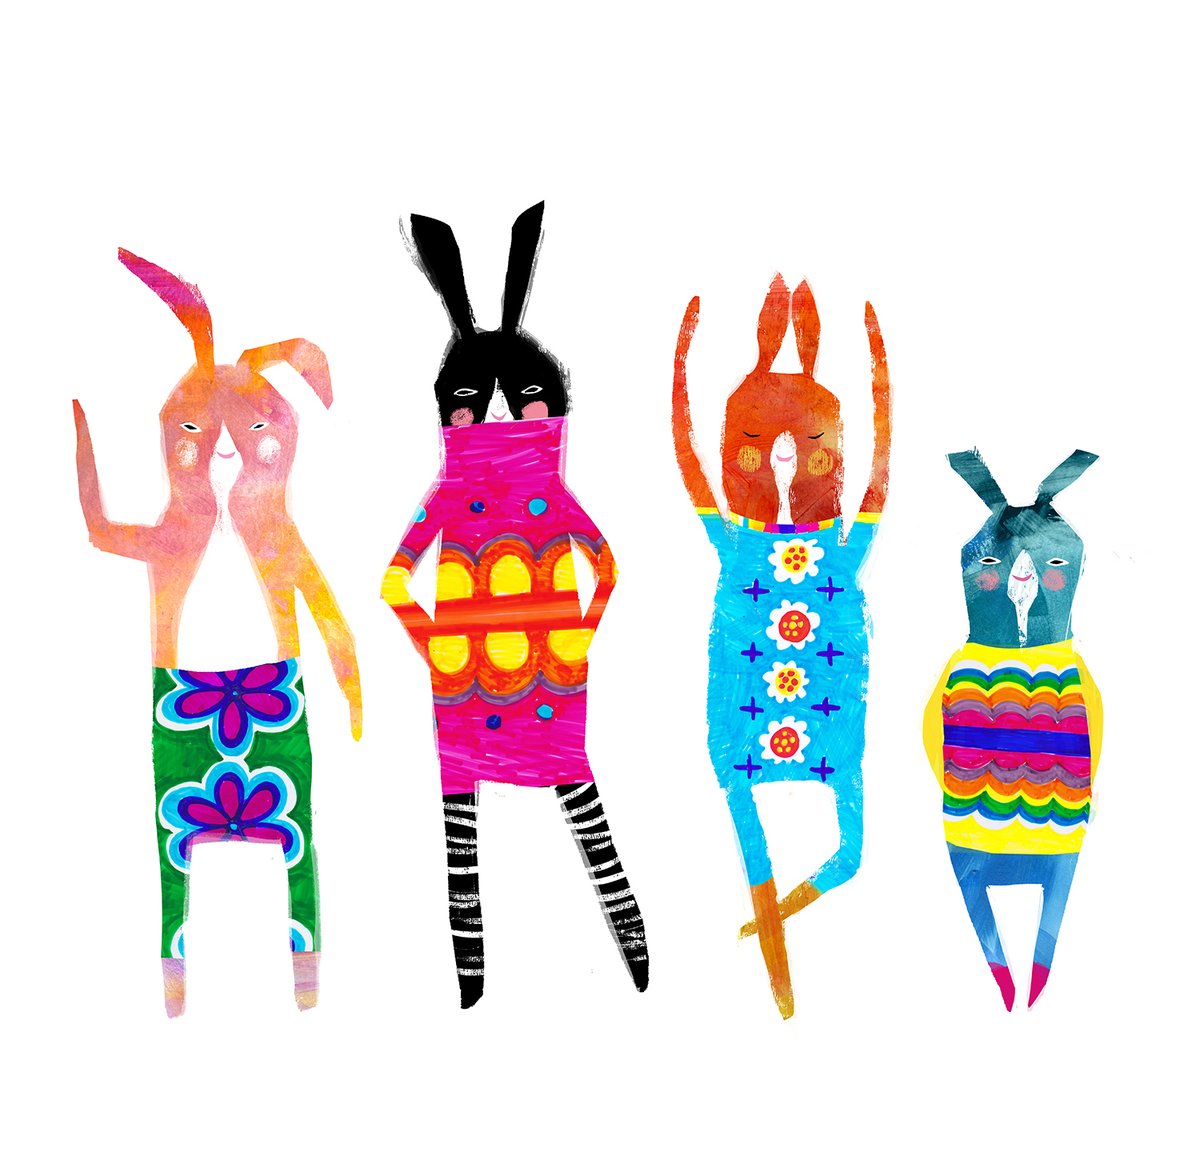 Easter is coming! I spy eggs and chicks and shiny candy in the stores....what's your fav? These four bunnies are dressed to impress with their fancy outfits based on chocolate wrappers.... #easter #easter2024 #illustration #illustrator #illustrationartists #bunnies #rabbits